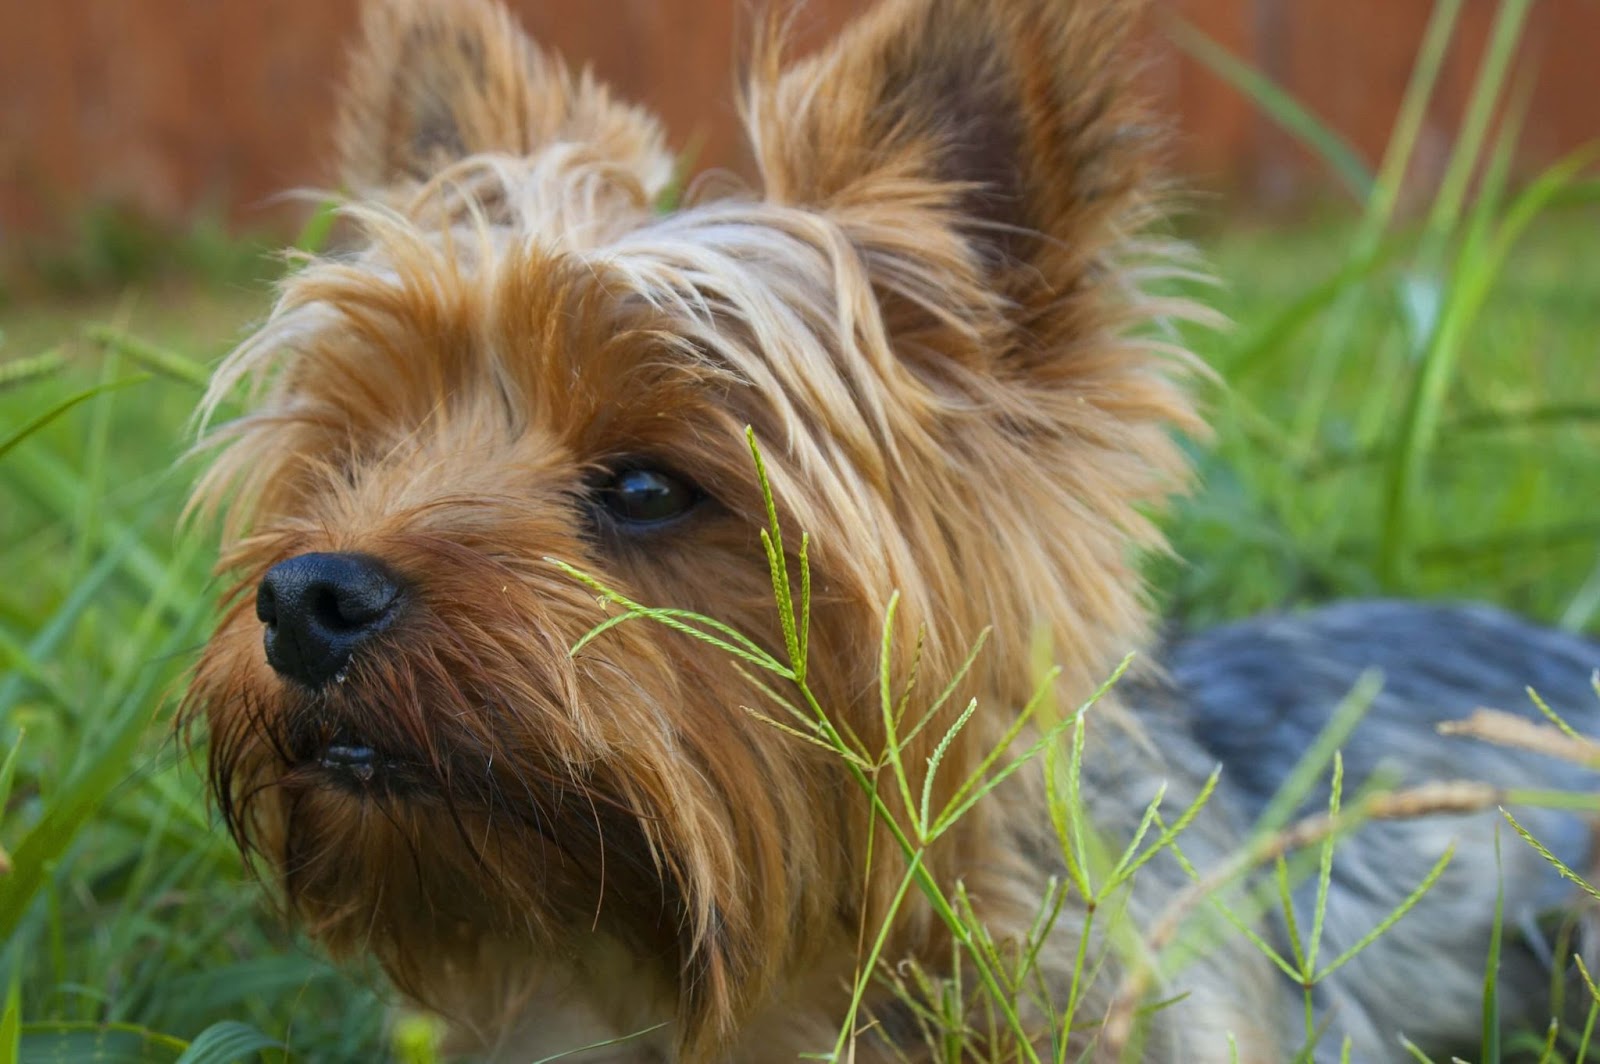 How Fast Can a Yorkie Run?
